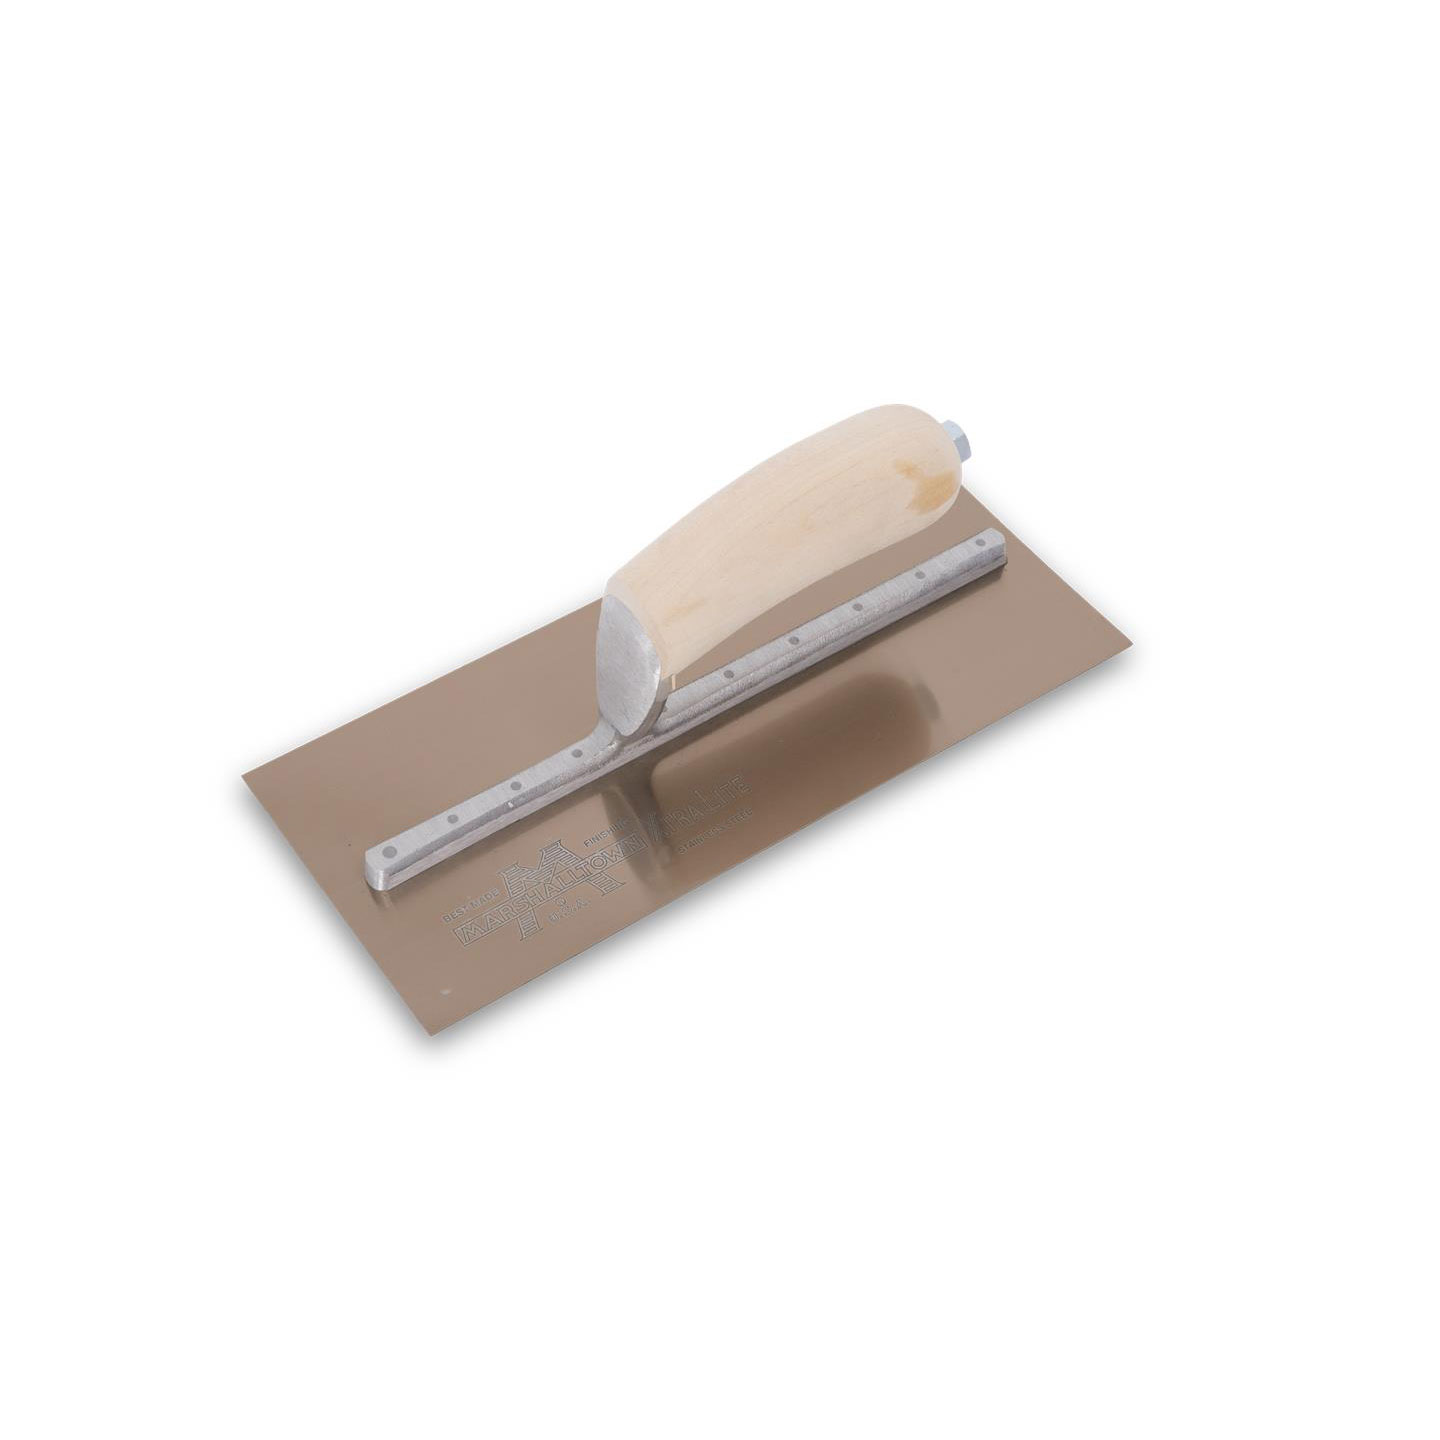 Marshalltown MXS4GS 11-1/2in. x 4in. 3/4 Golden Stainless Steel Finishing Trowel Curved Wood Handle MAT-MXS4GS